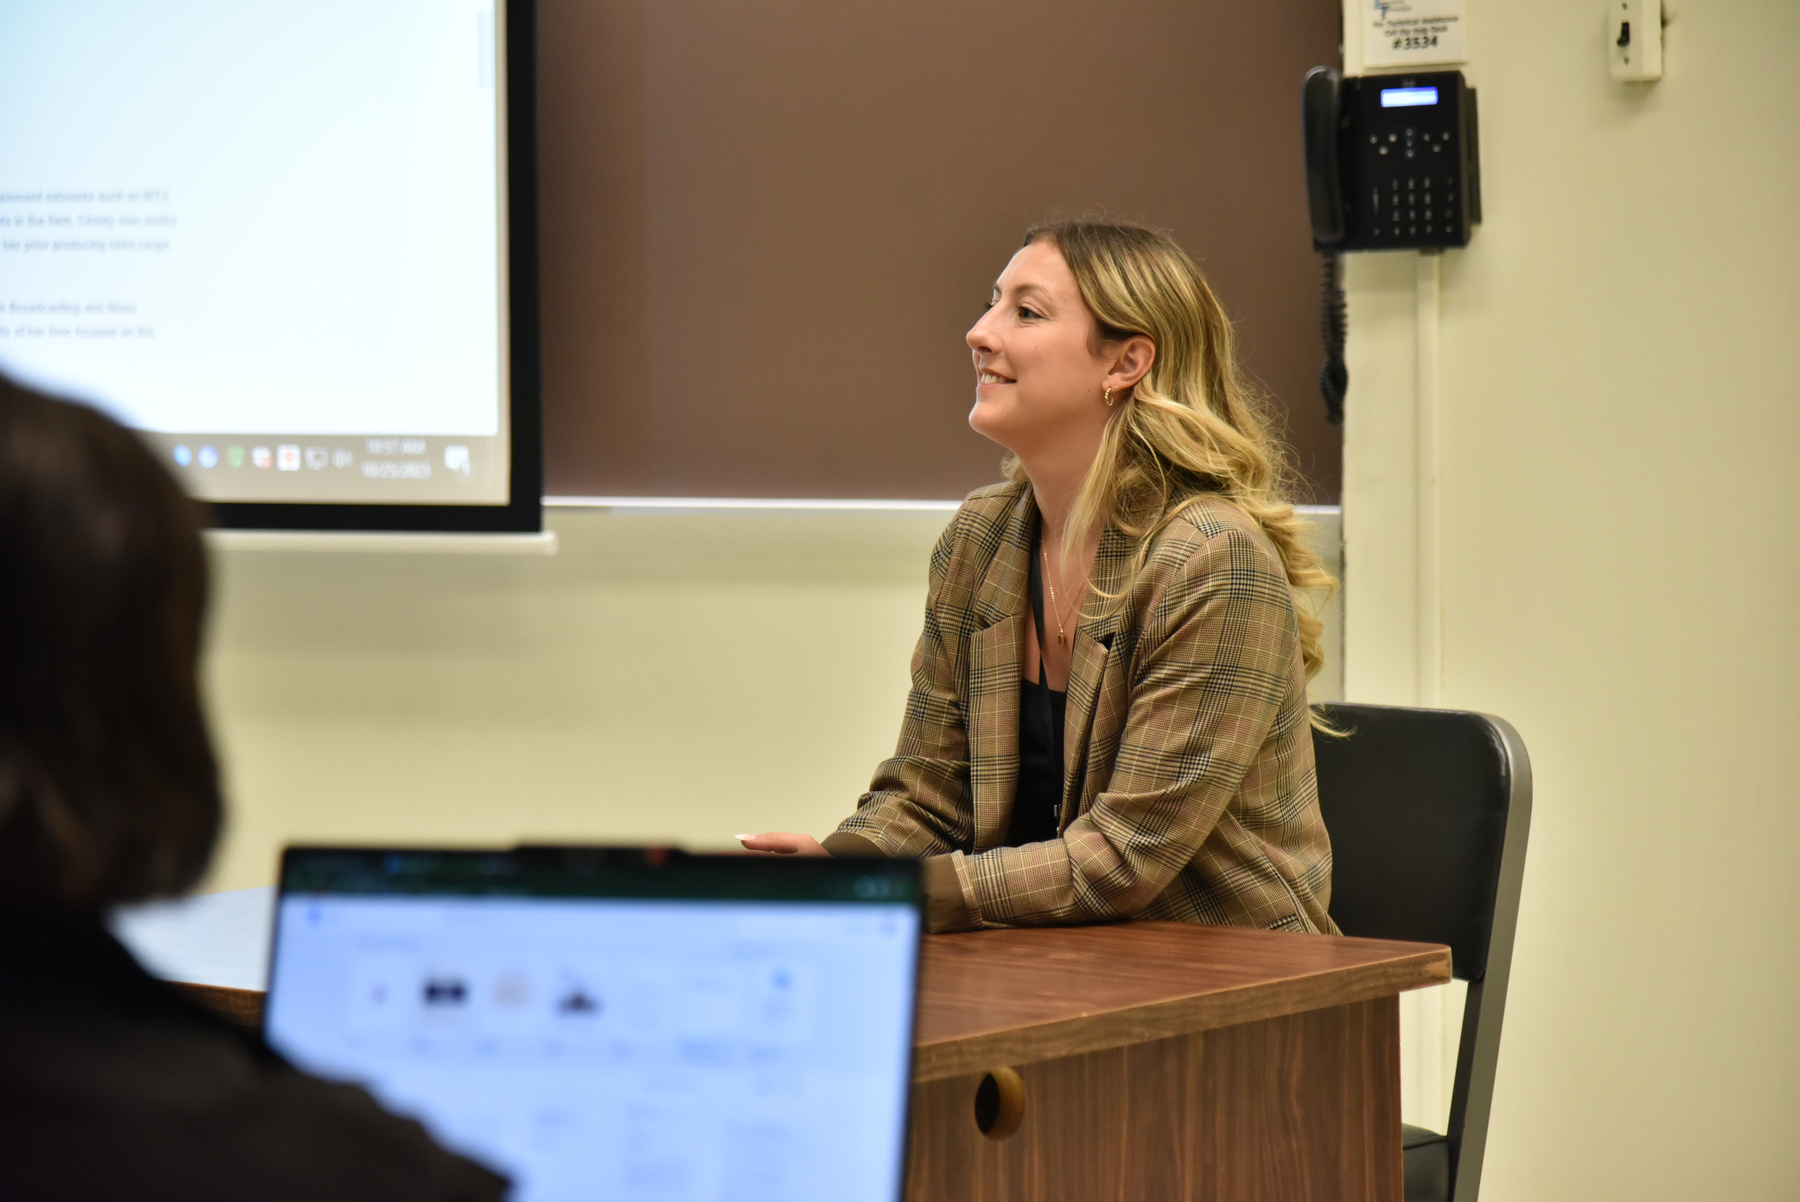 Media Summit panelists and alumni Career Connectors spoke to classes the morning prior to the featured panel discussion. Panelist Christy Somers '15, a non-fiction TV producer, speaks to a public relations class taught by Khairul Islam in Lanigan Hall.